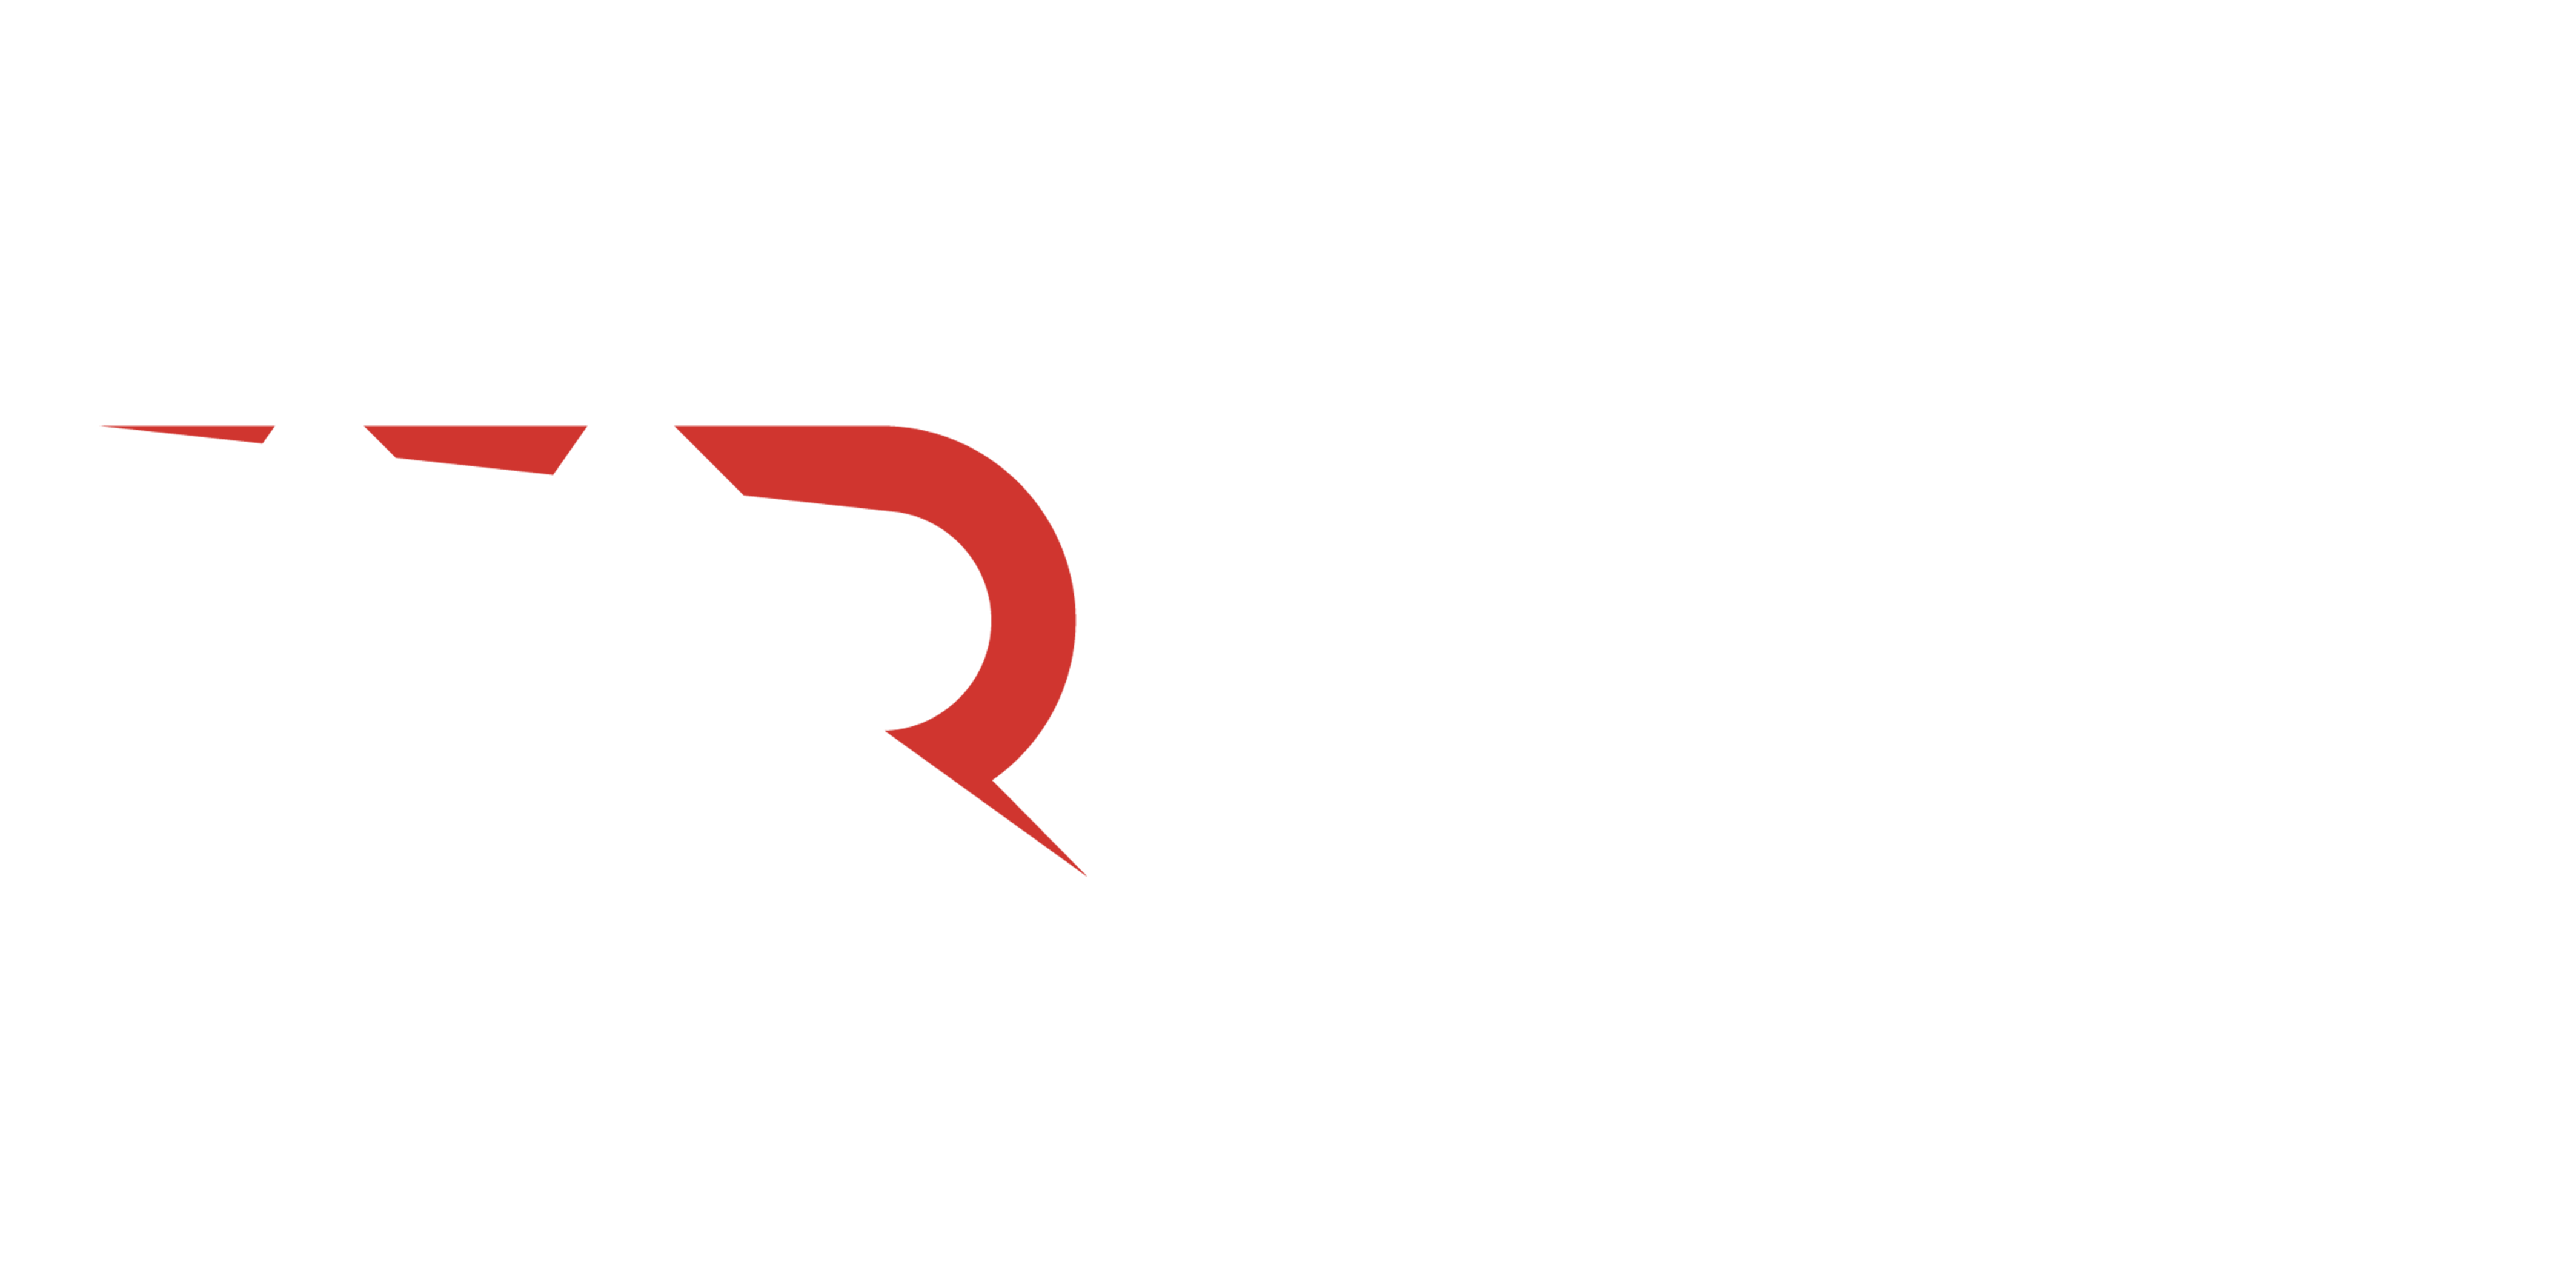 Mineral_Resources_Footer_3